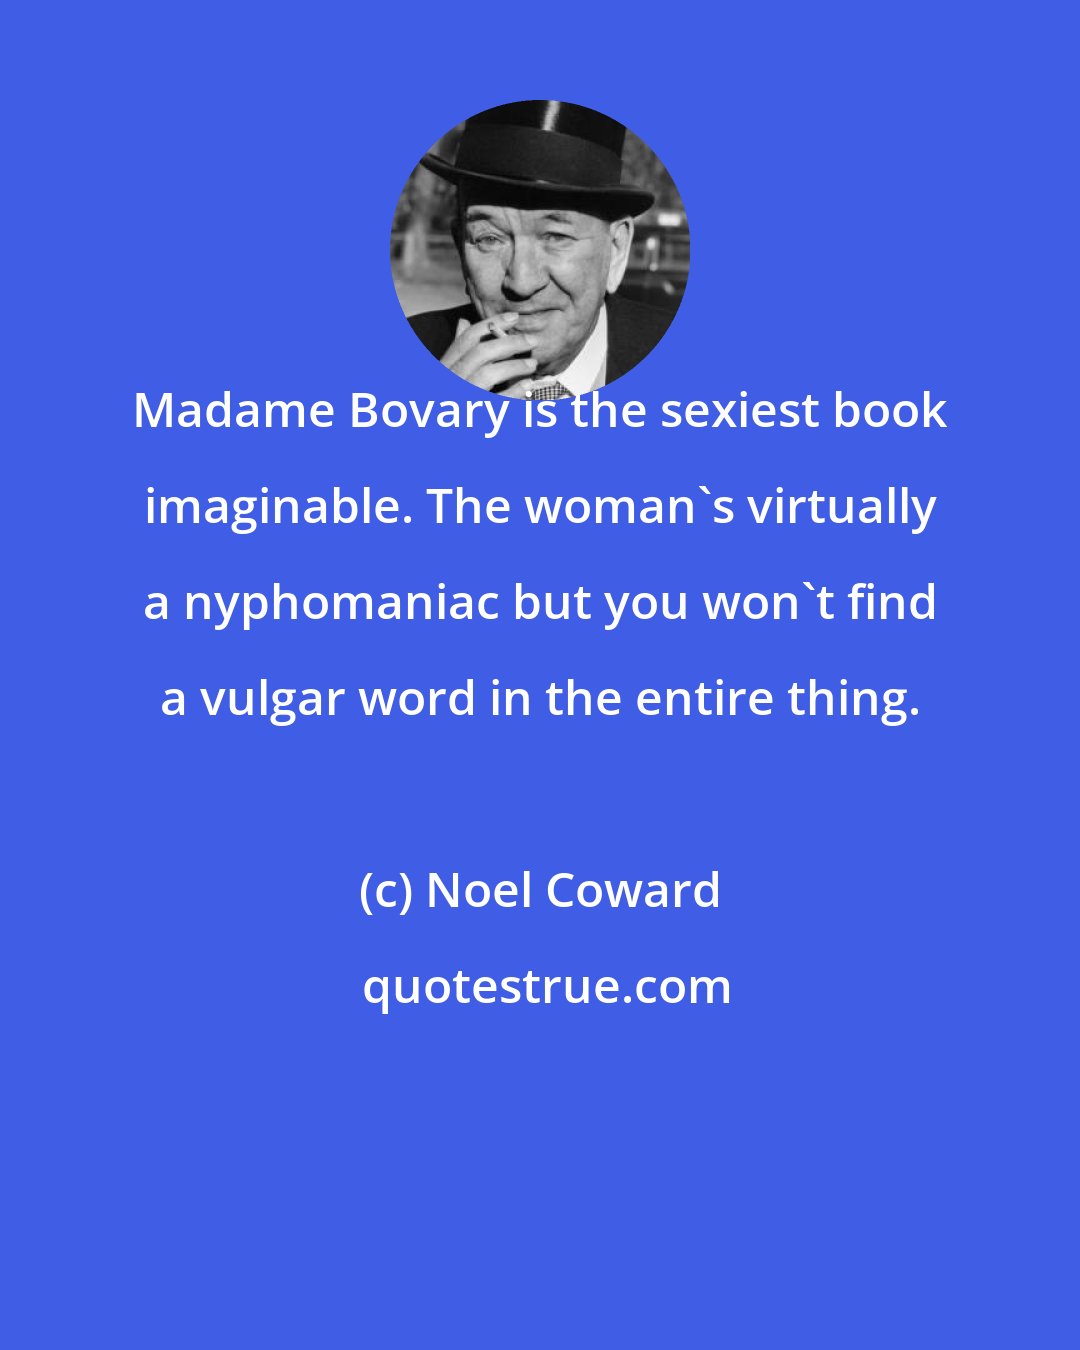 Noel Coward: Madame Bovary is the sexiest book imaginable. The woman's virtually a nyphomaniac but you won't find a vulgar word in the entire thing.